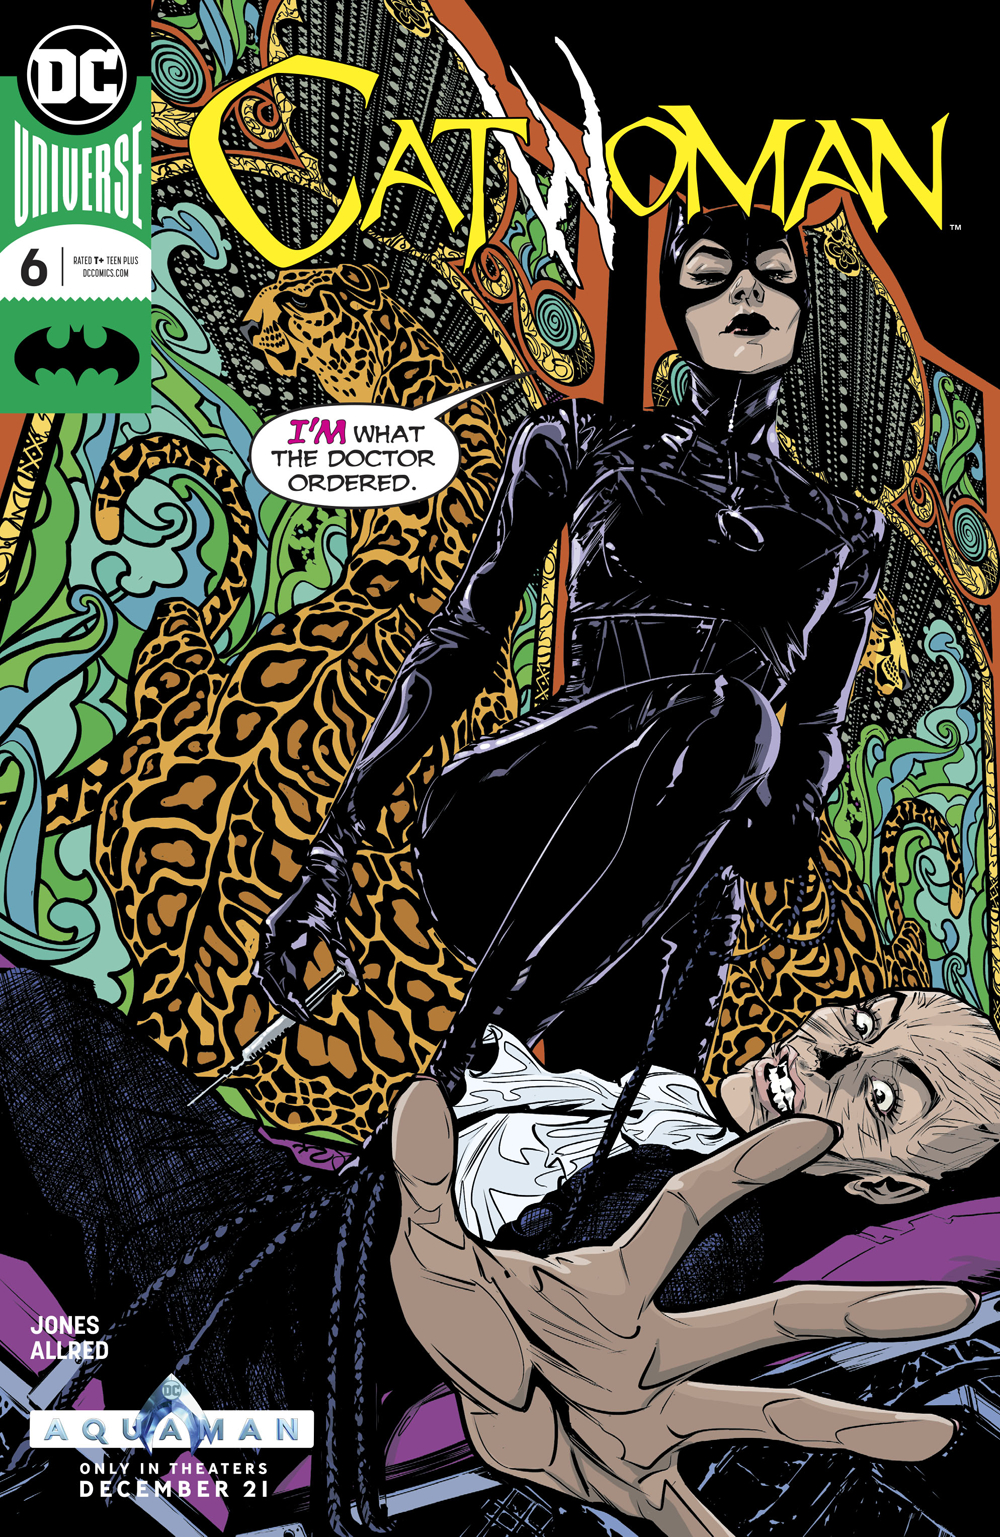 CATWOMAN #6